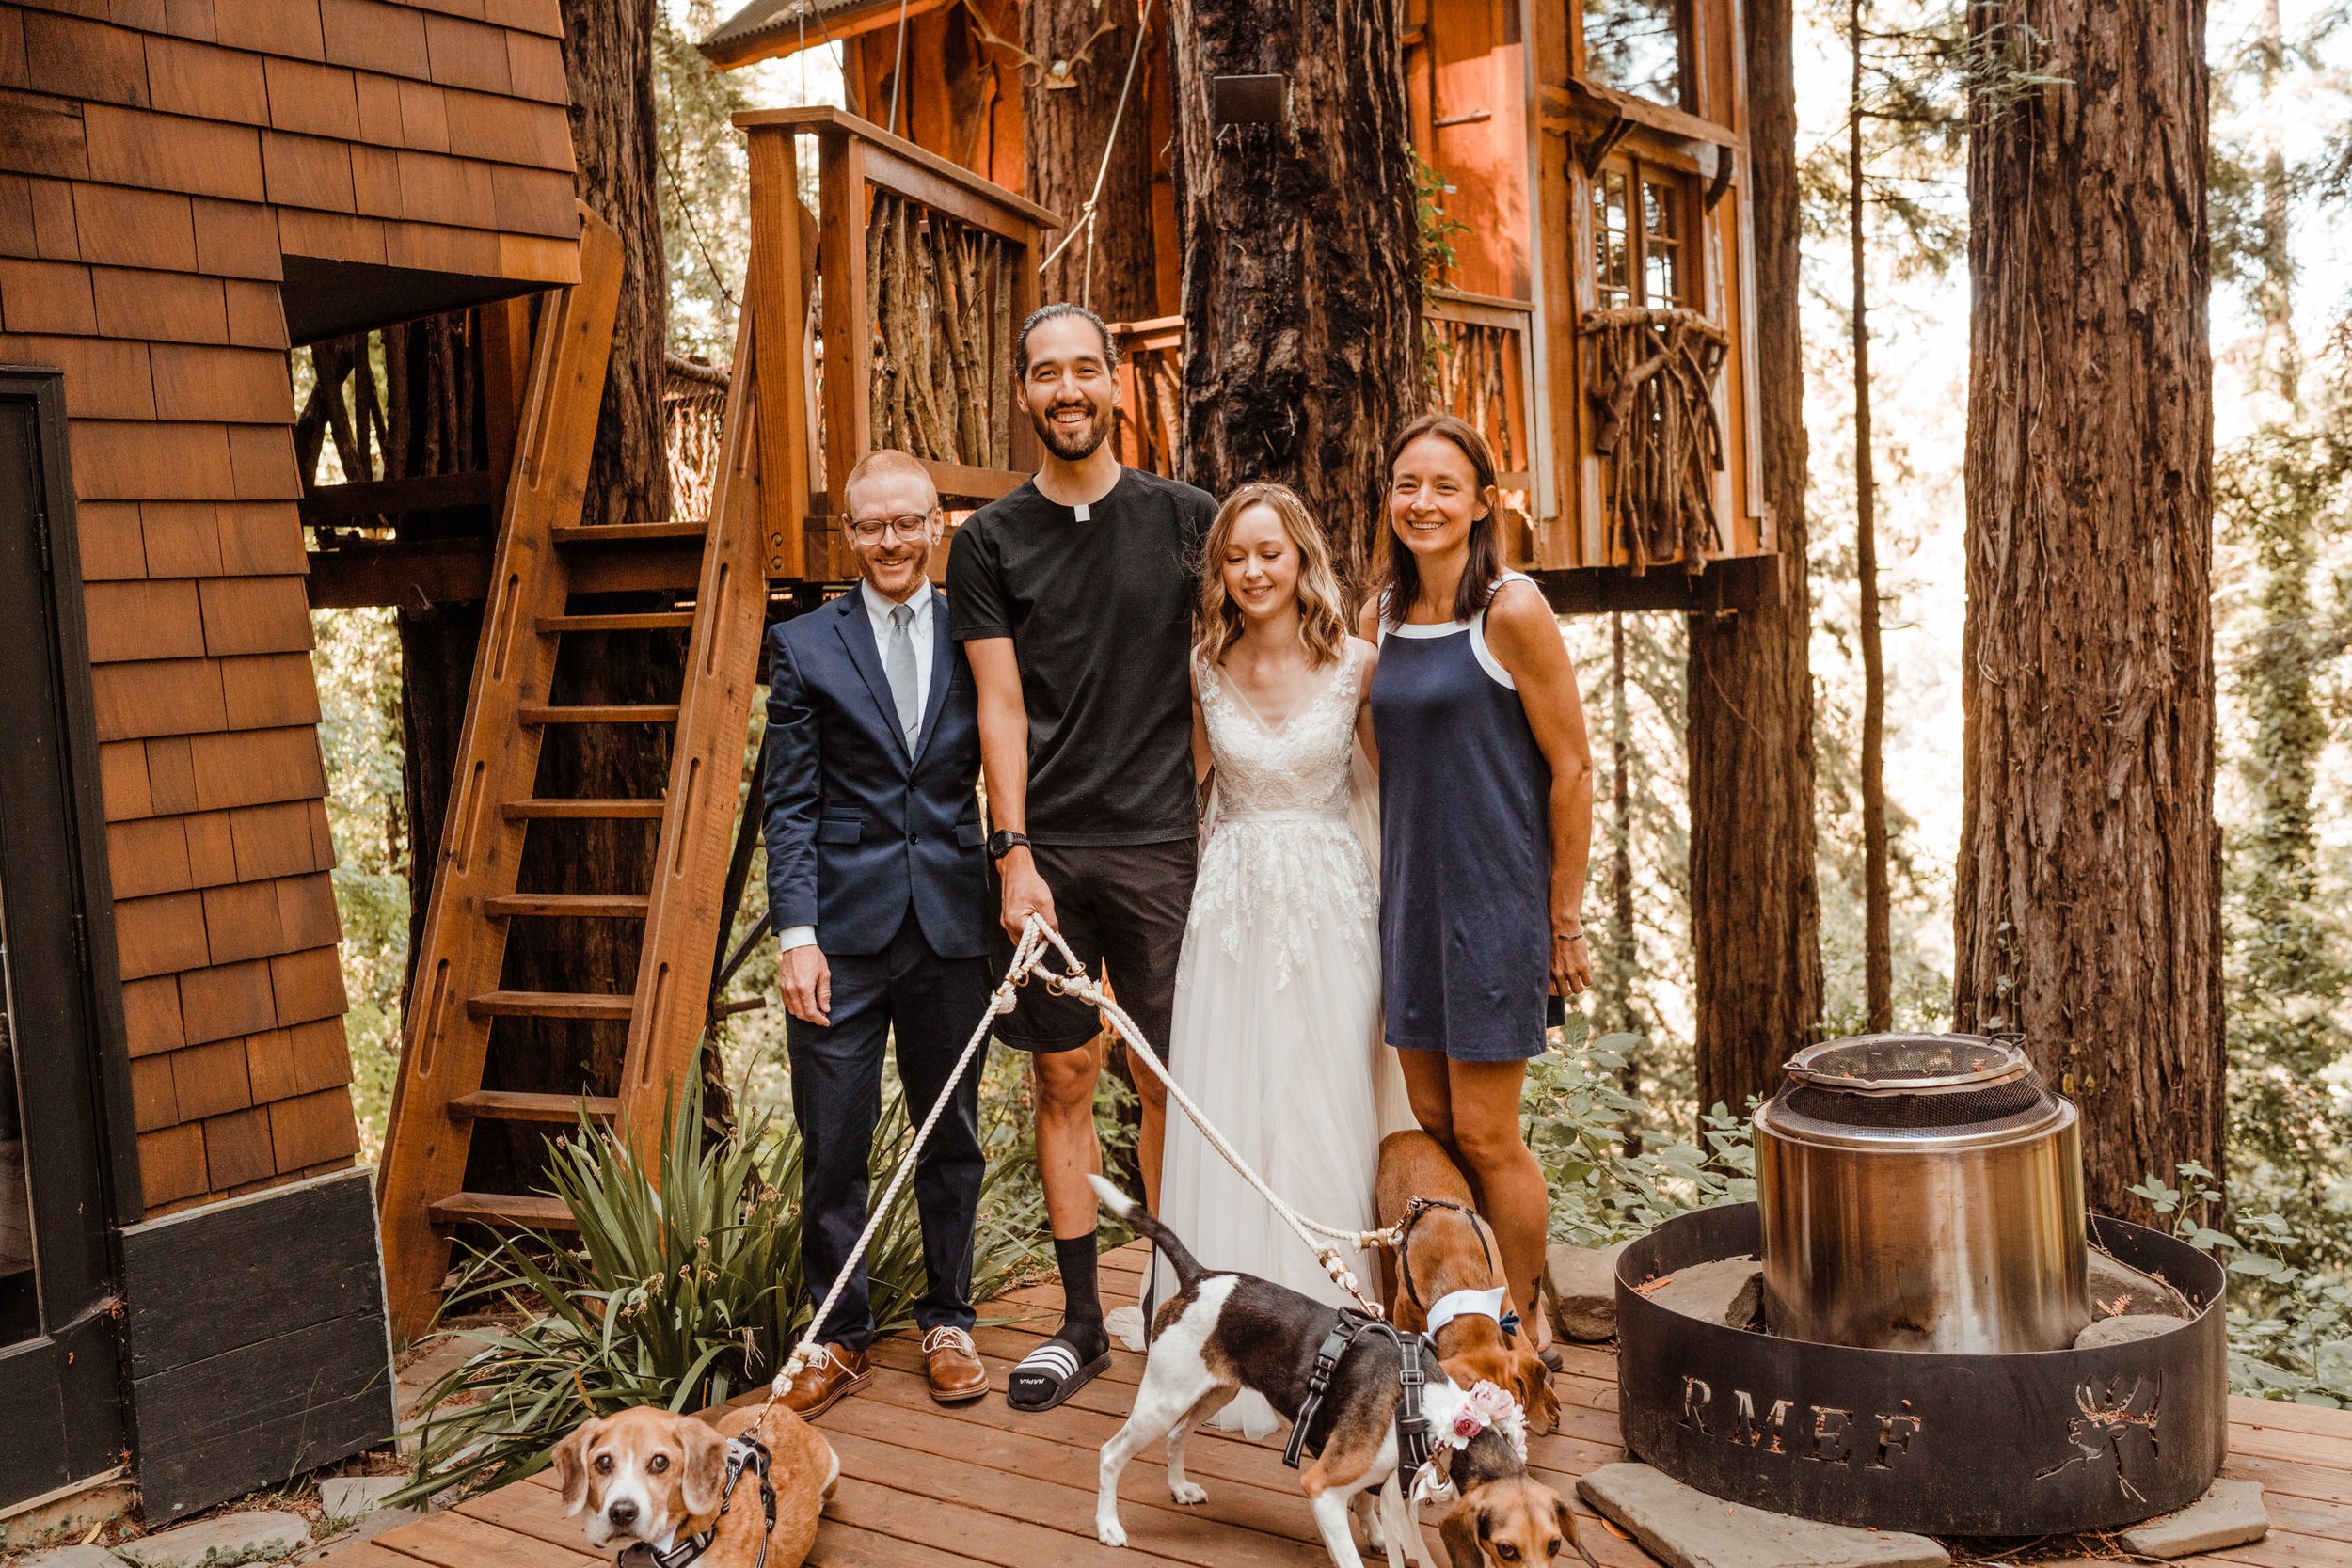 Wedding-in-the-Woods-Bride-and-Groom-with-Best-Friends-and-Dogs (3).jpg